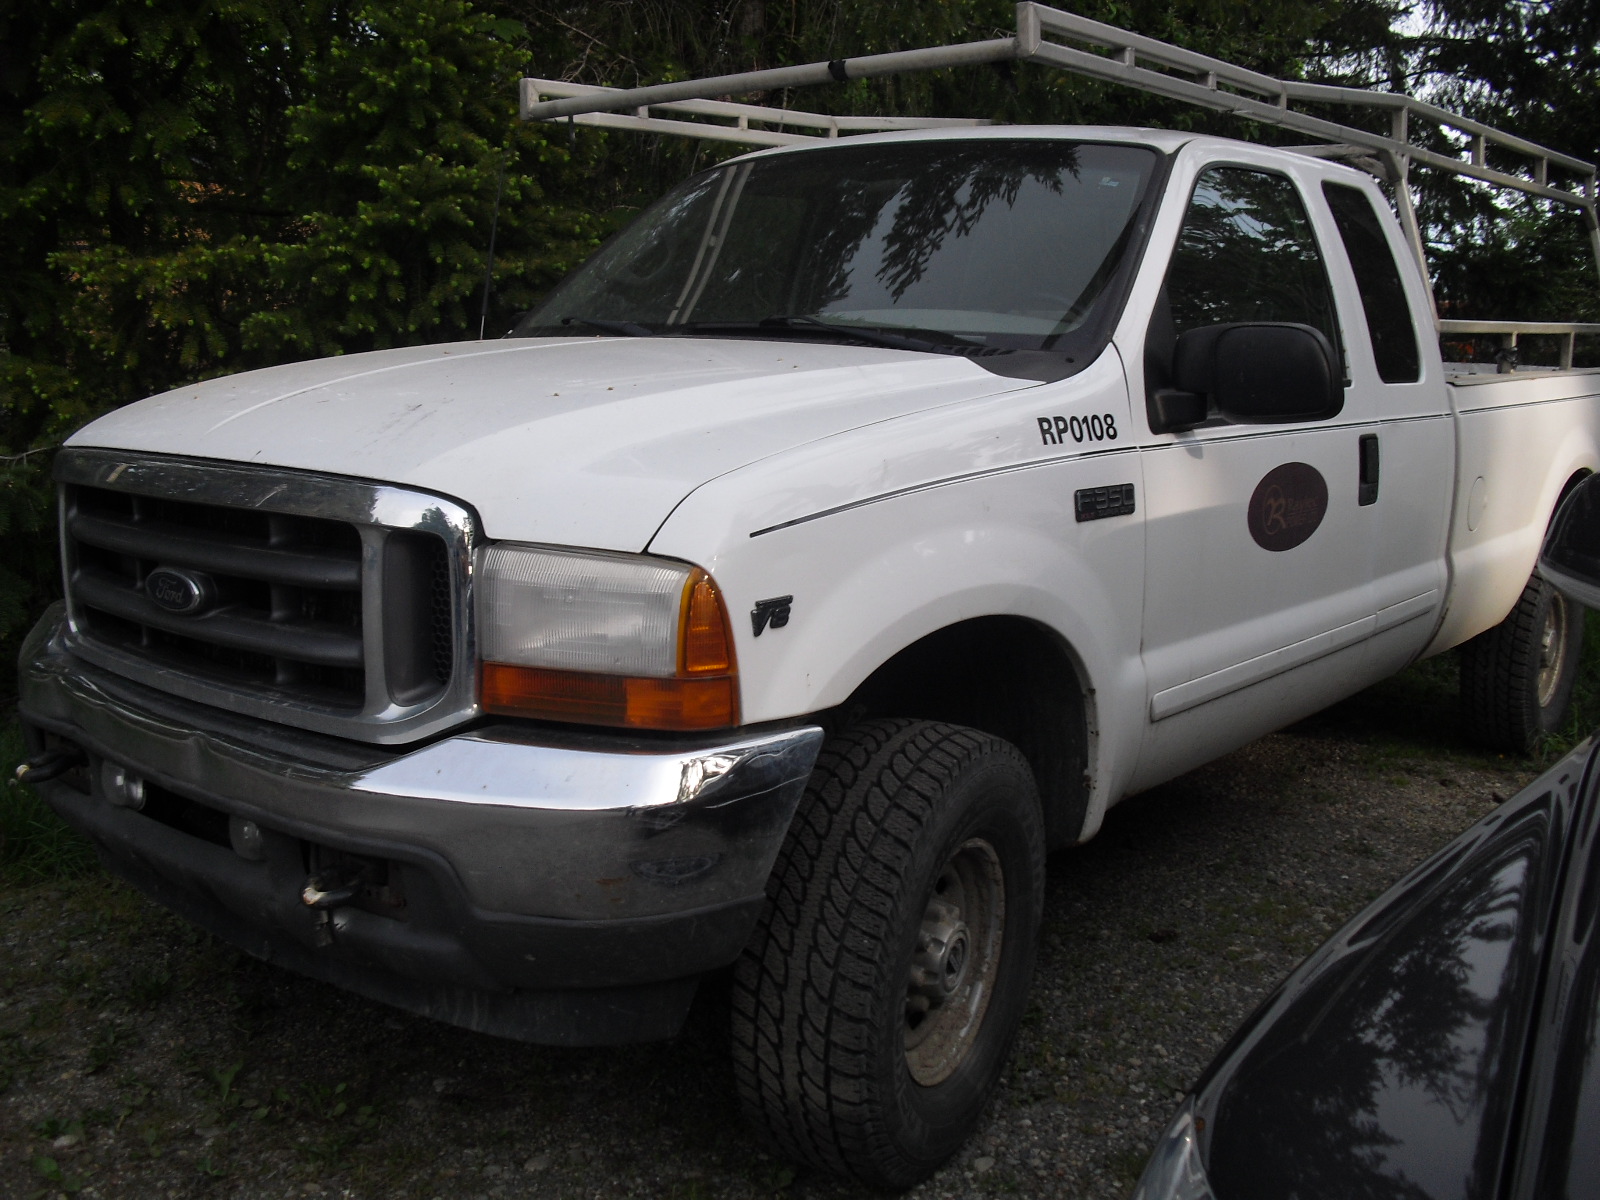 Mainroad surplus vehicles and equipment available for purchase